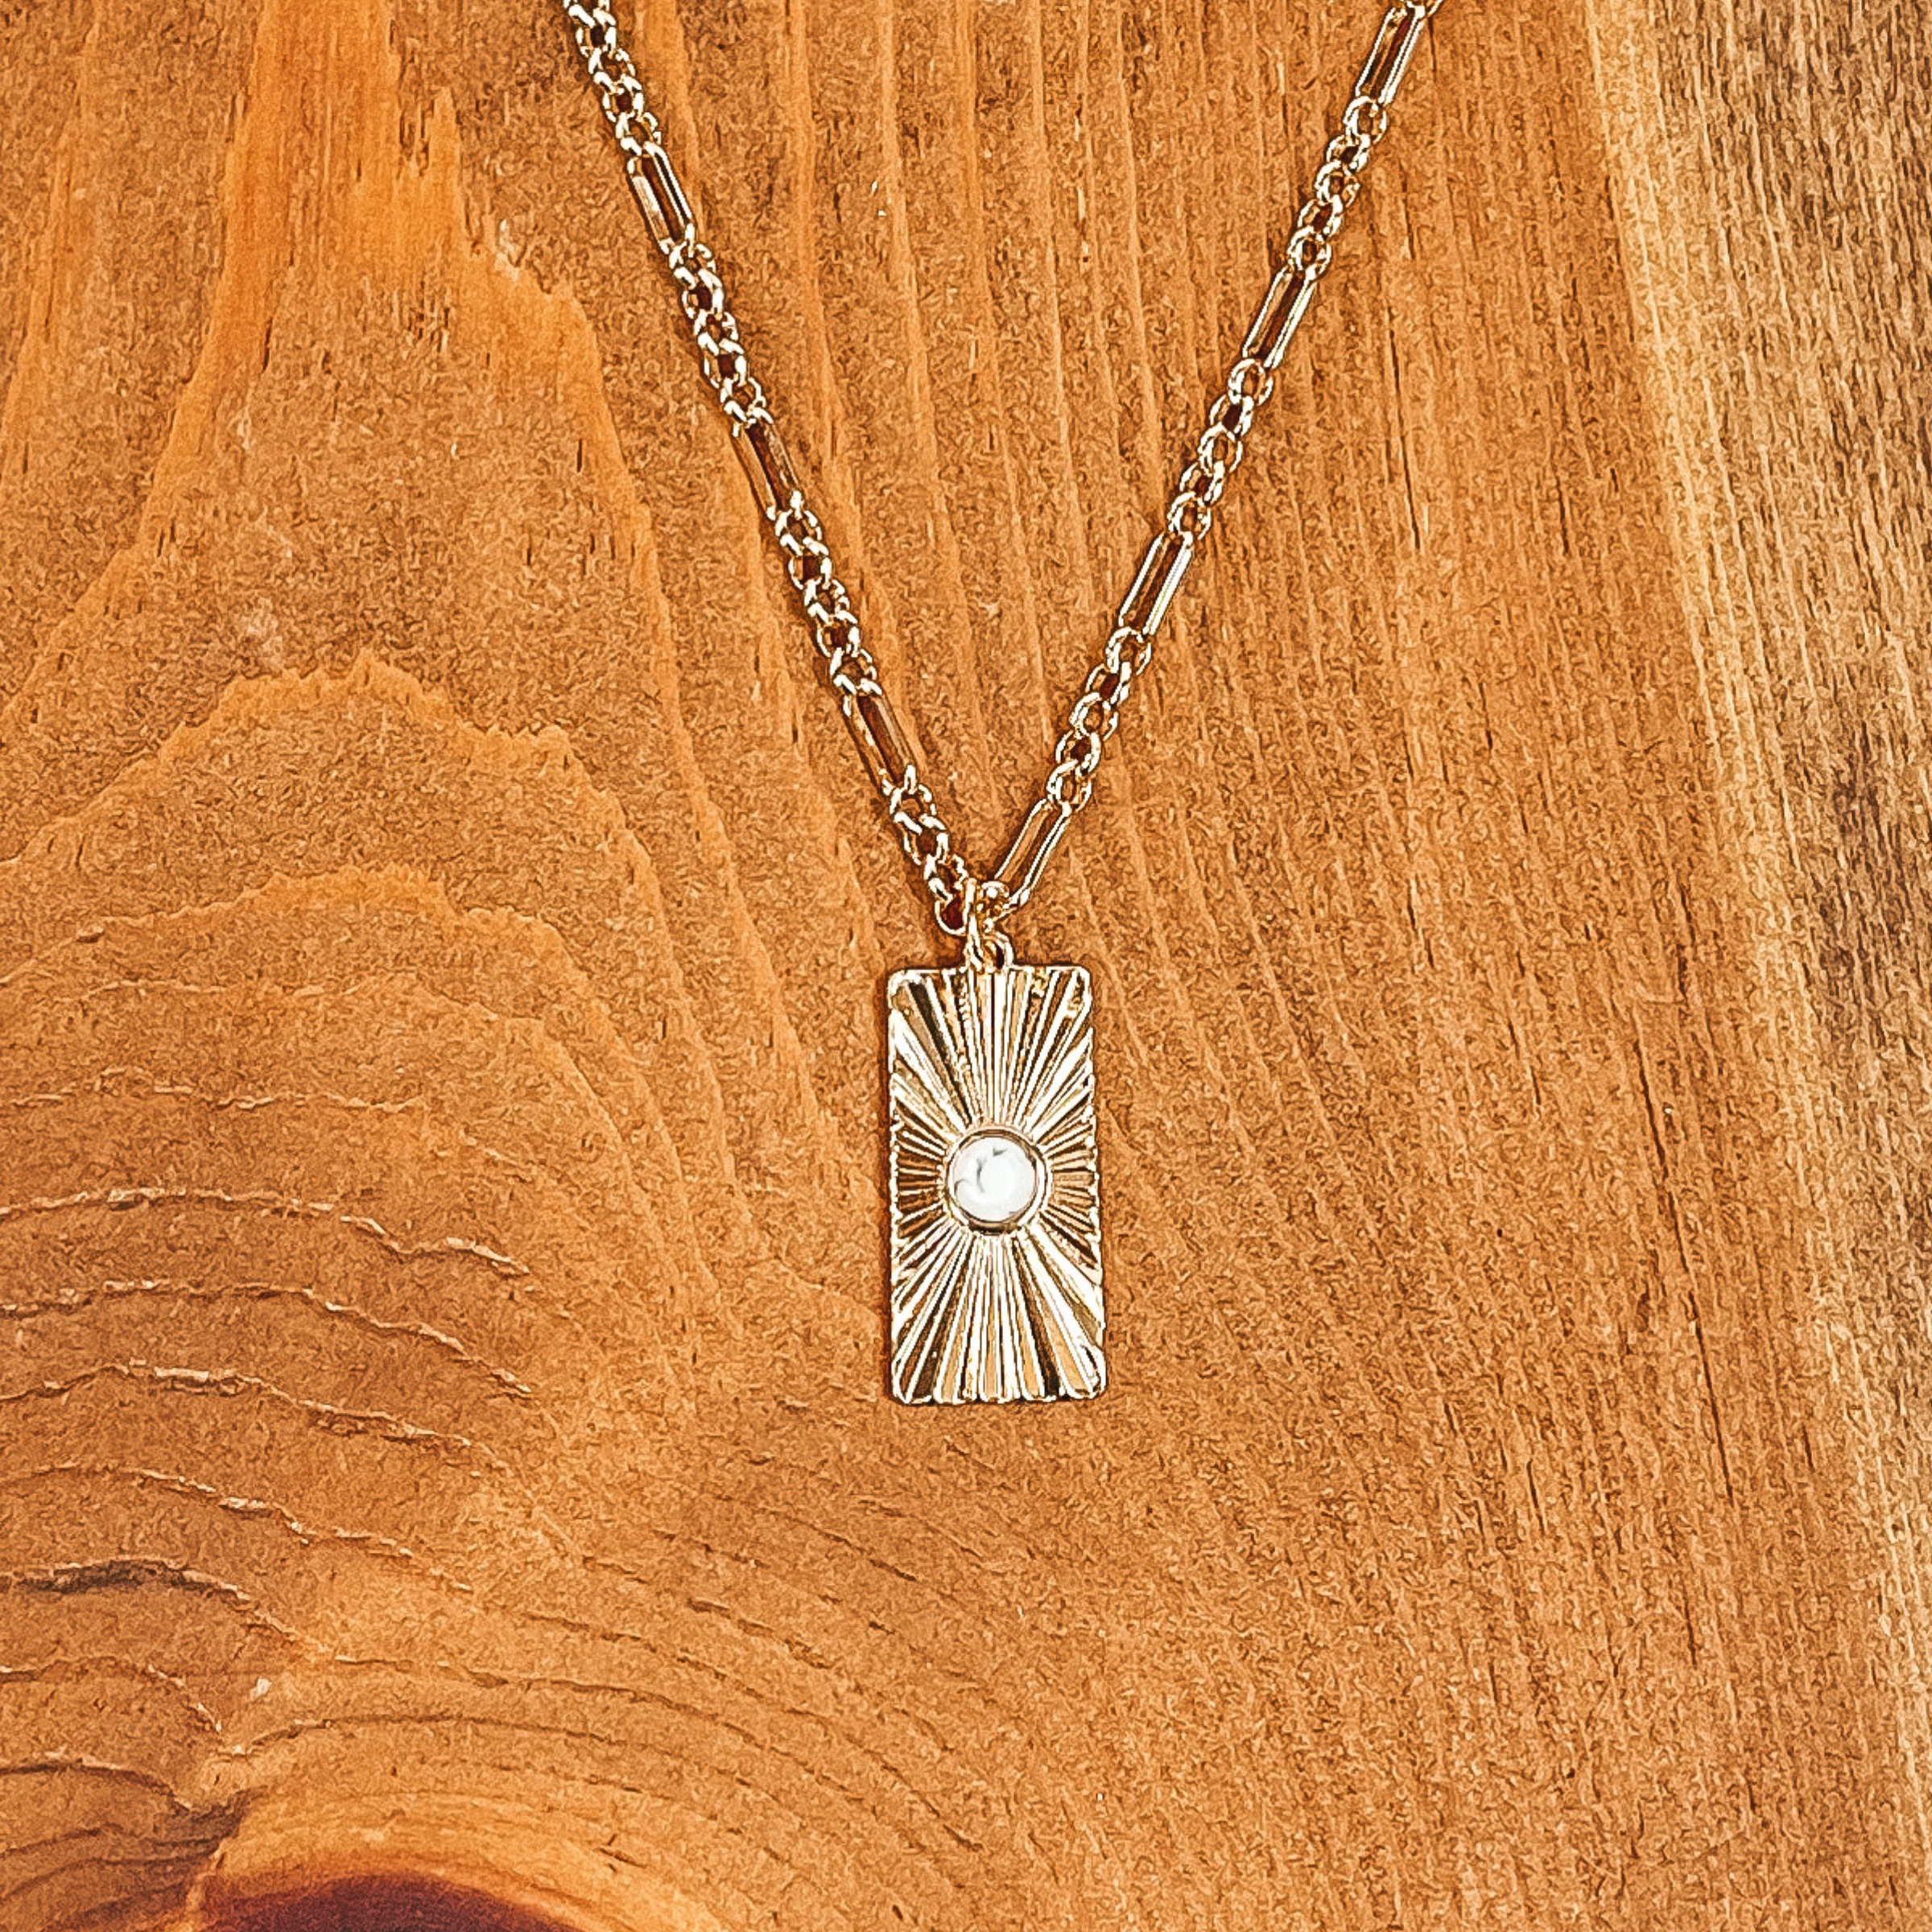 Convince Me Gold Necklace with Sunburst Rectangle Pendant and Small Stone in White - Giddy Up Glamour Boutique